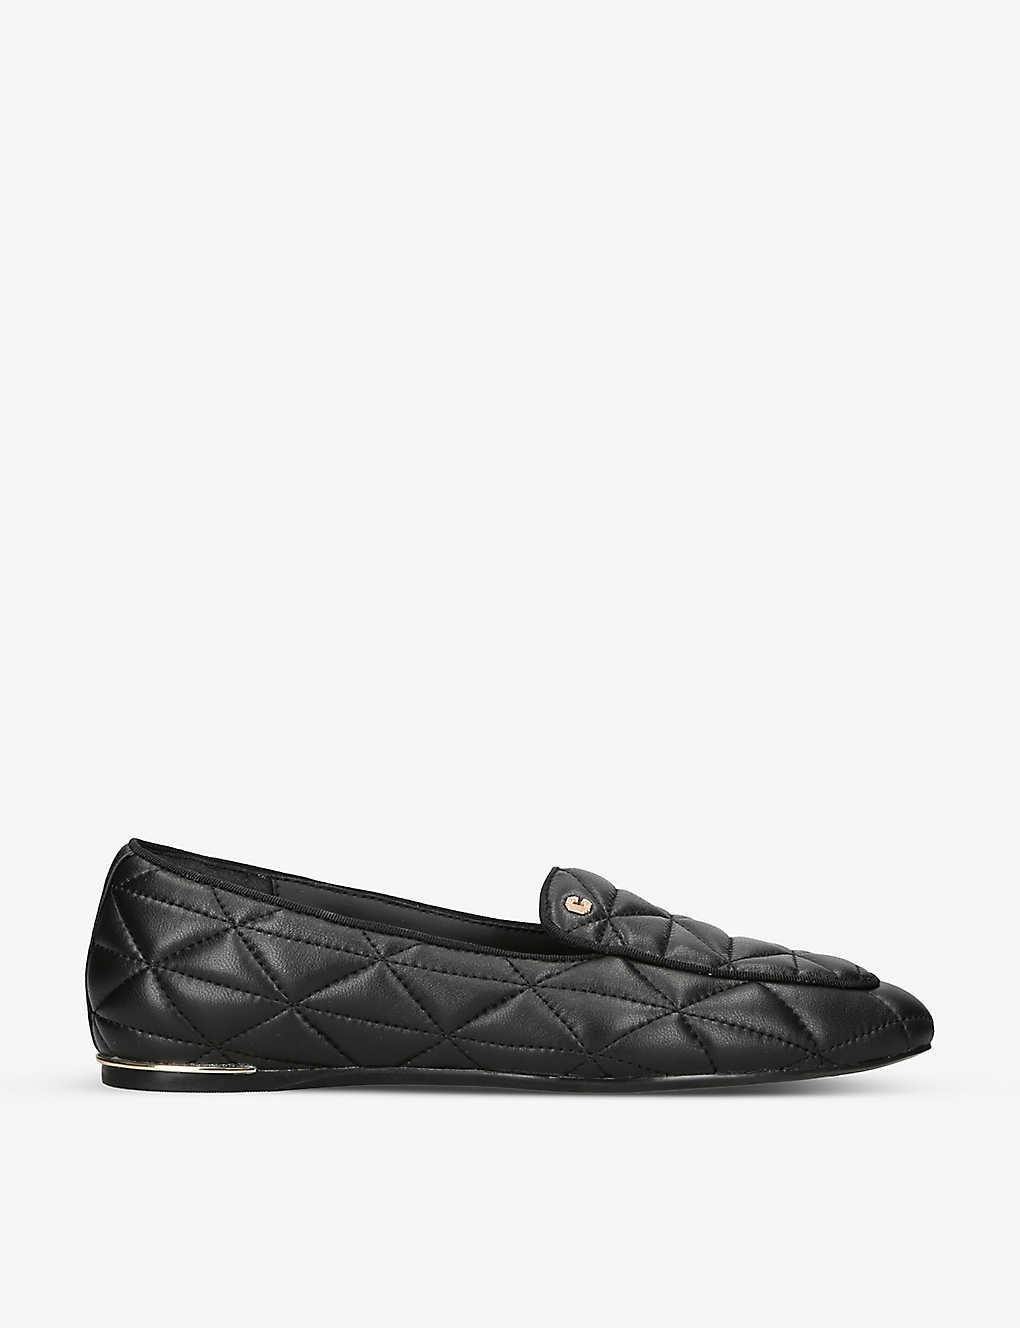 Carvela Kurt Geiger Loyal Quilted Leather Loafers in Black | Lyst